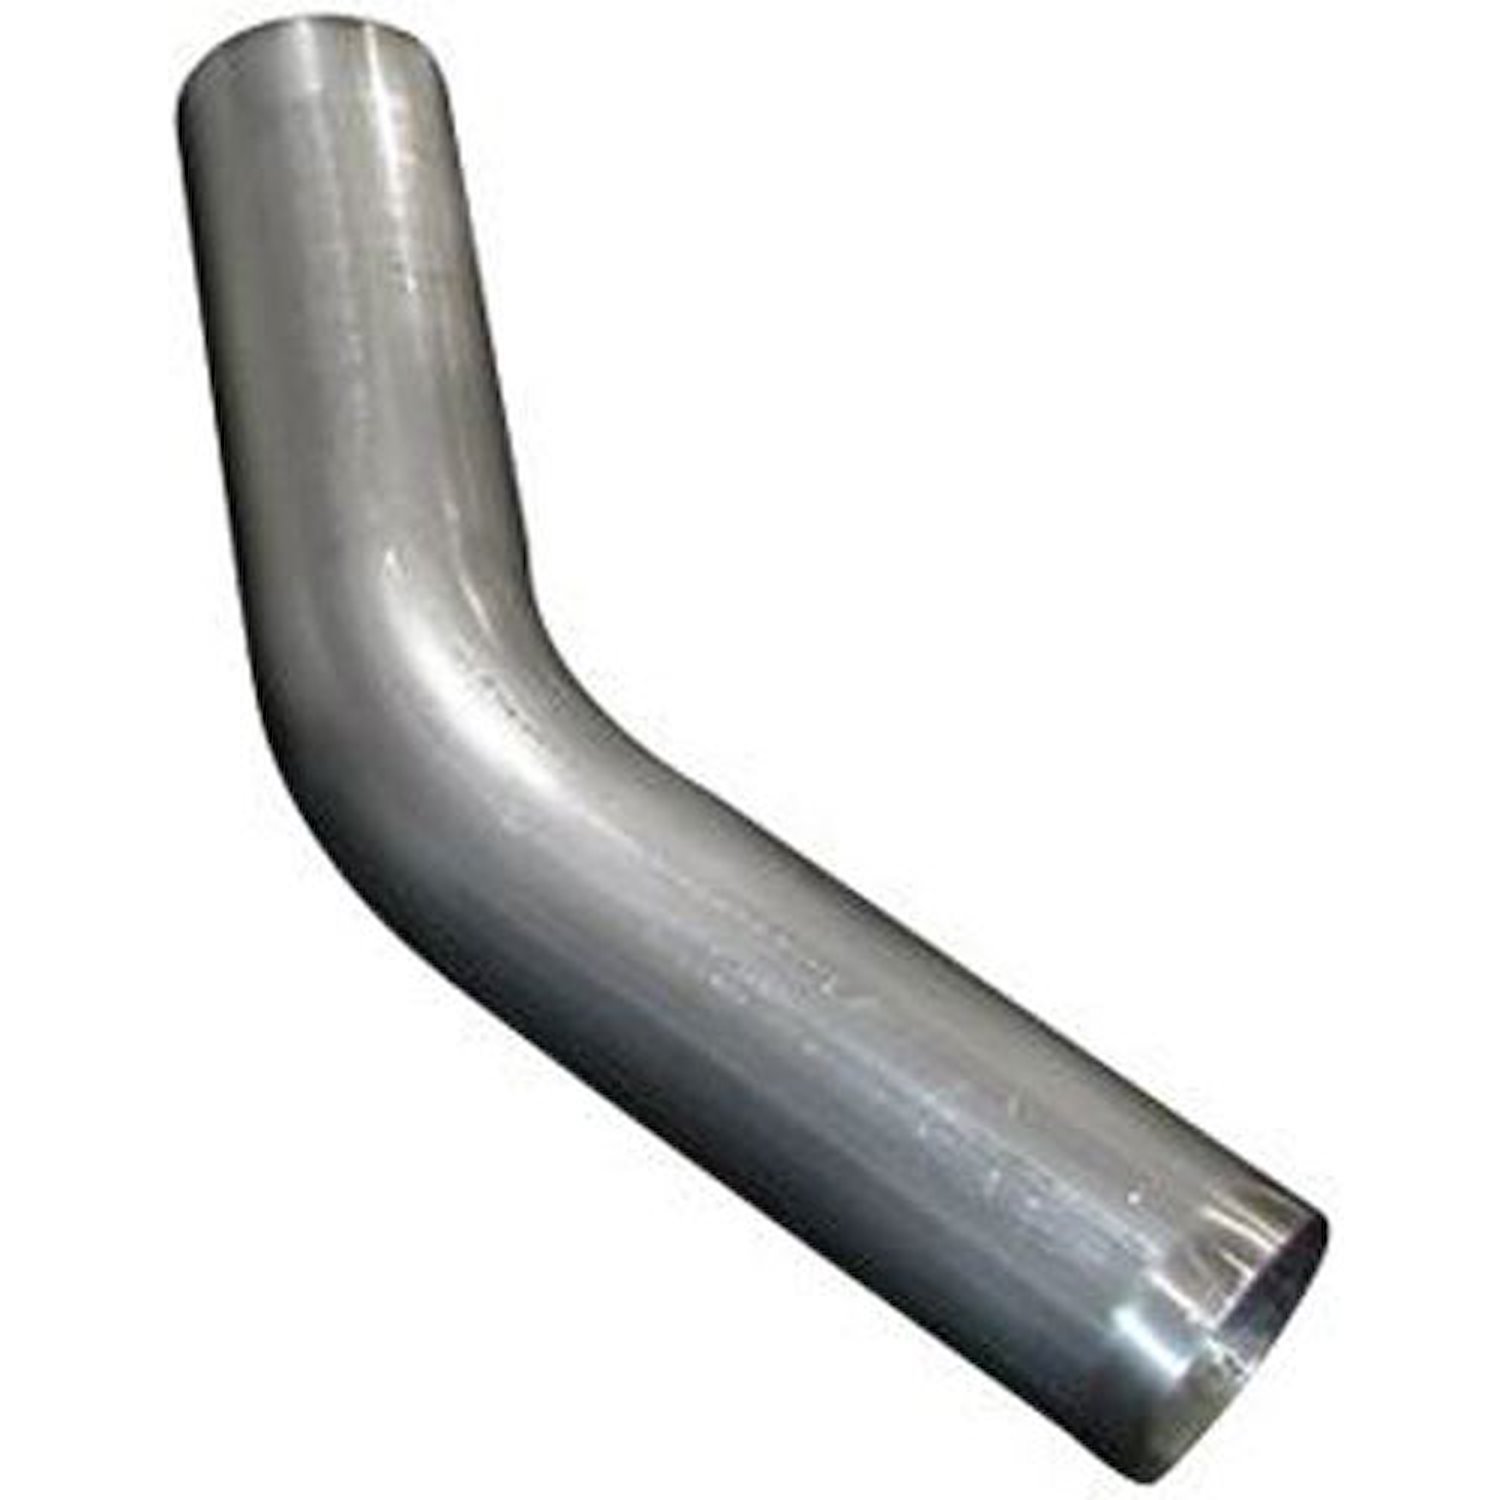 Stainless Steel 45° 2-1/2" Exhaust Bend